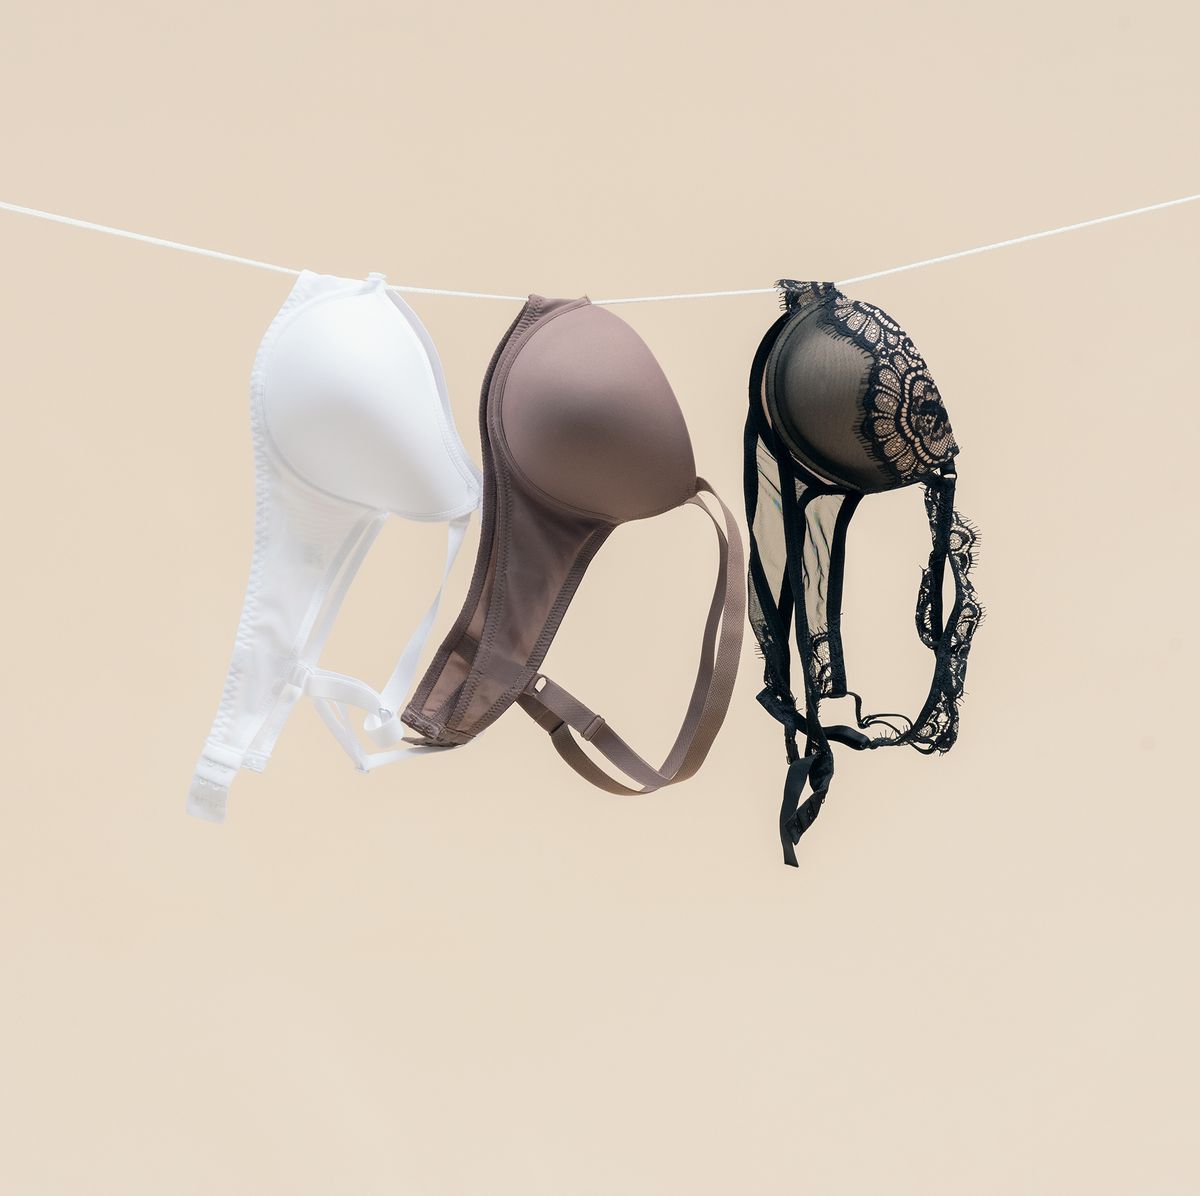 Bravissimo: Find your feel-good fit with a virtual bra fitting!